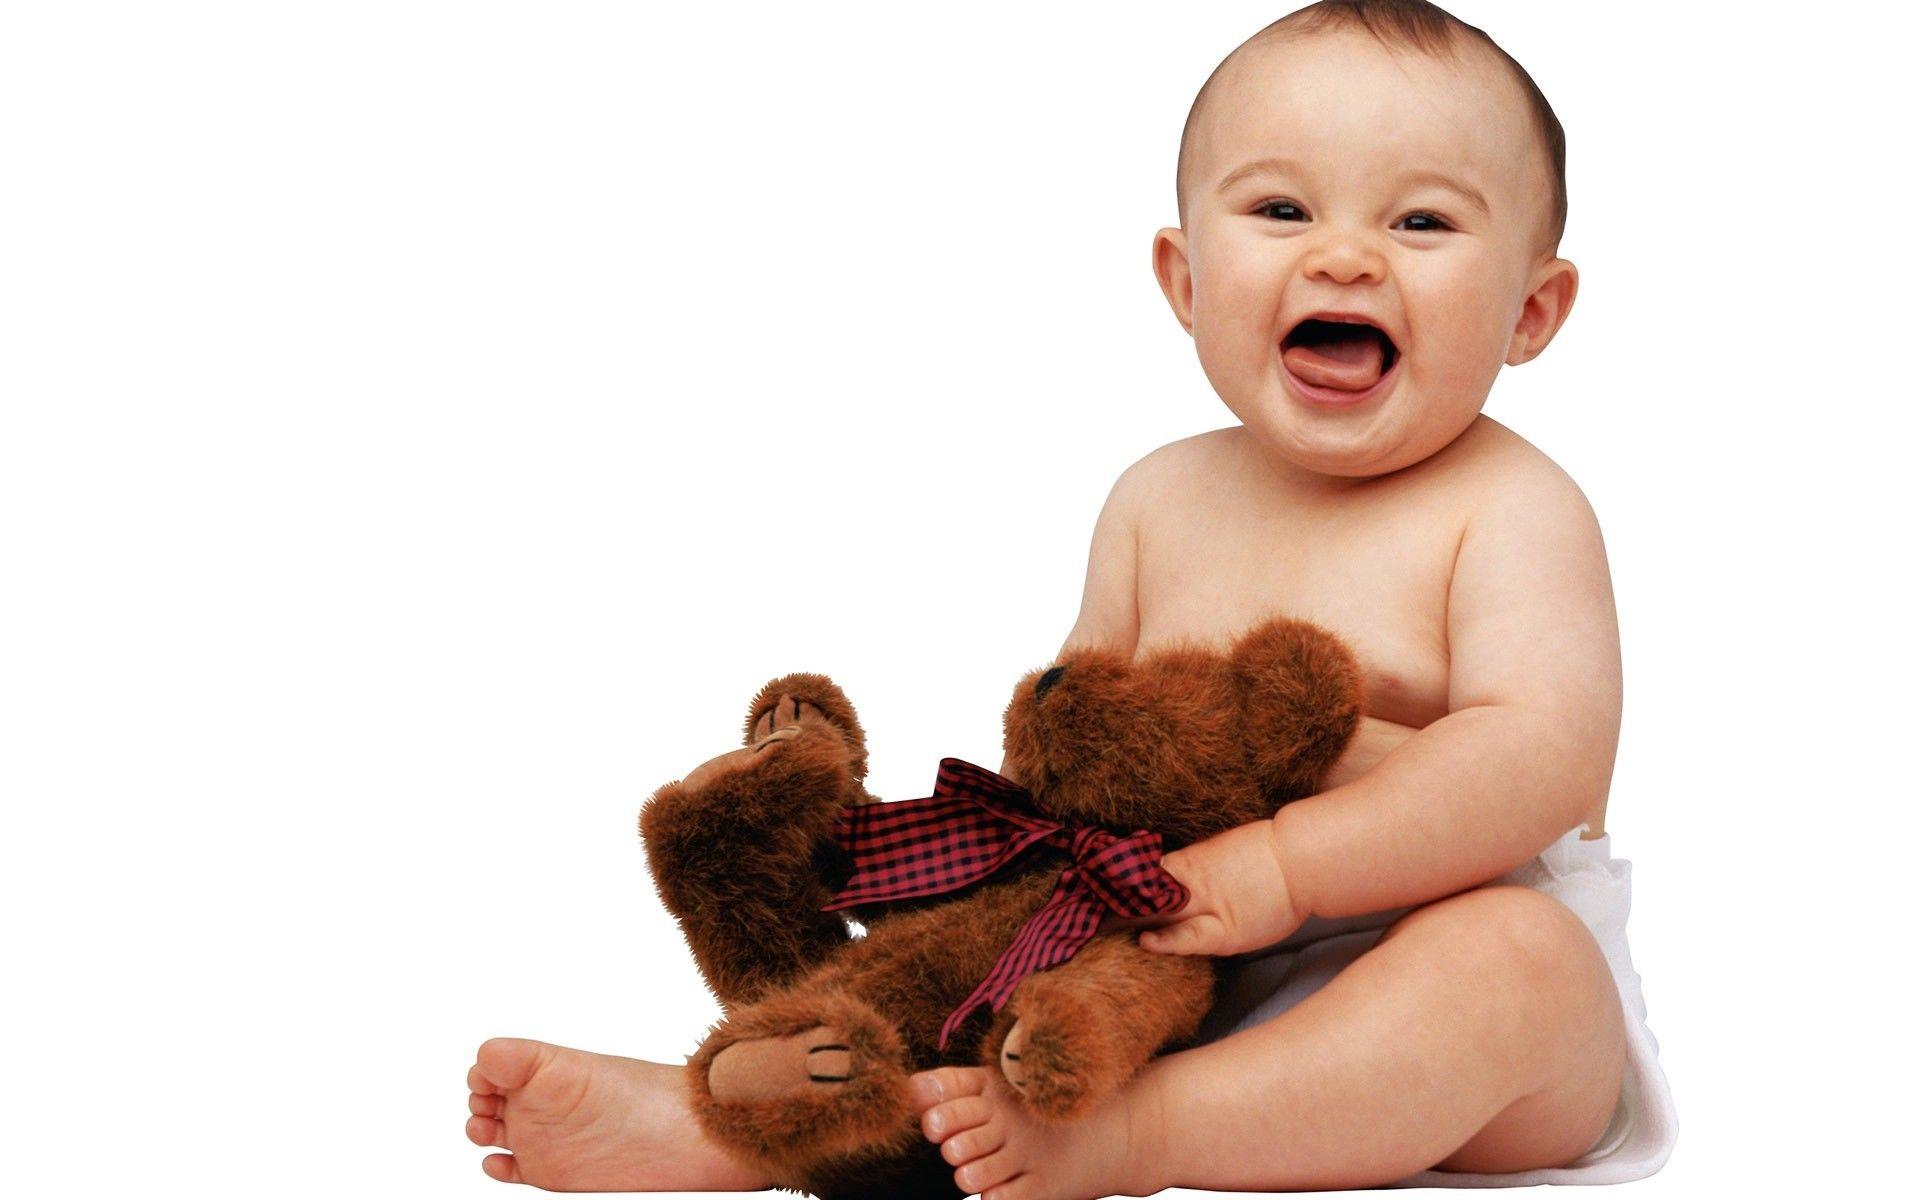 Cute Baby with Teddy. HD Wallpaper Download Wallpaper